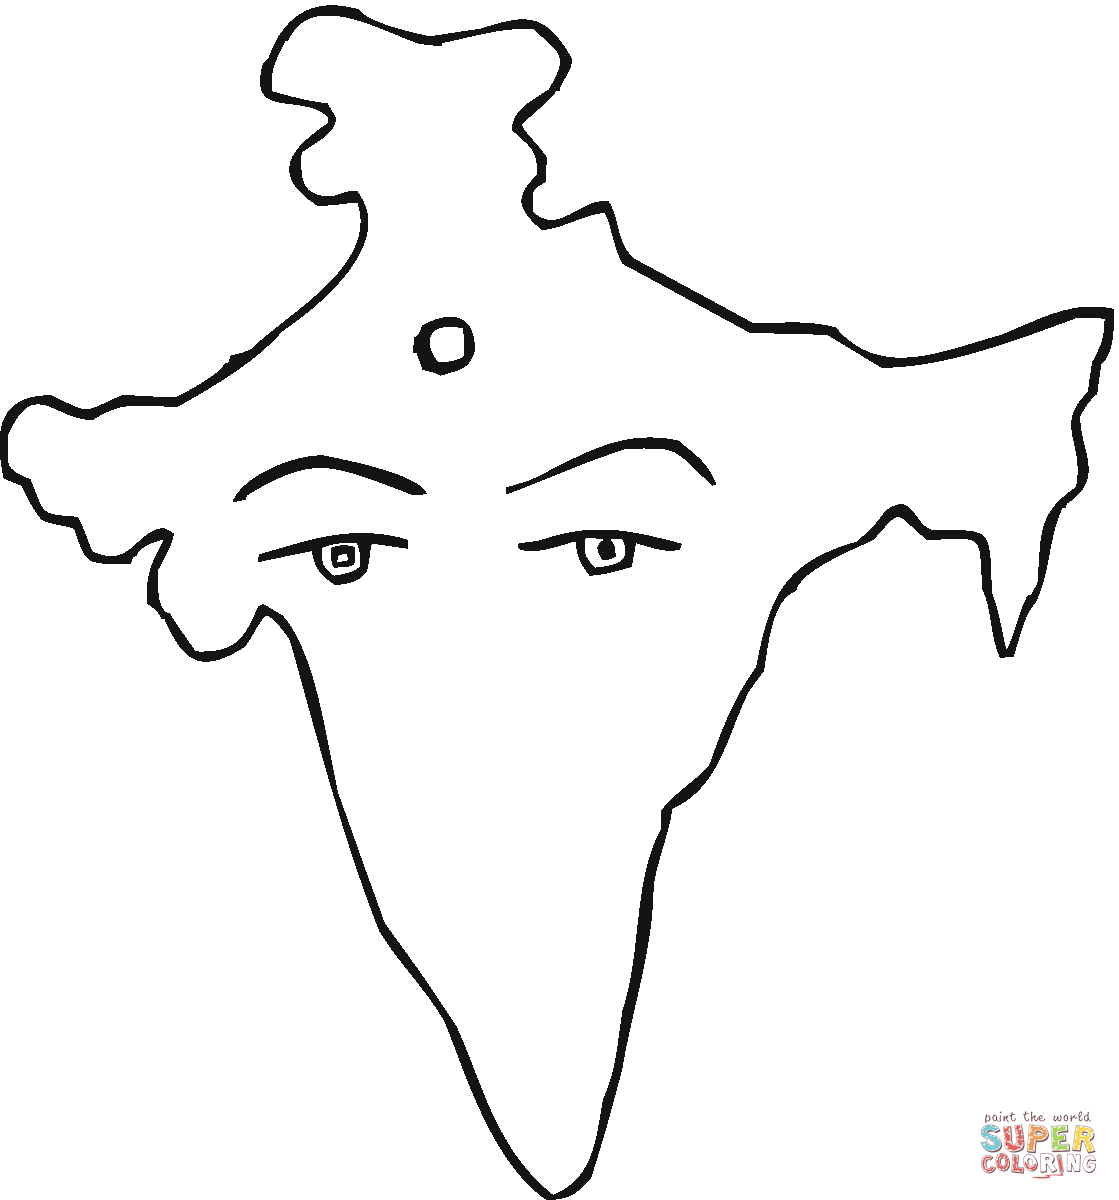 Stylized Simple Outline Map Of India Icon Blue Sketch Map Of India Vector  Illustration Stock Illustration - Download Image Now - iStock